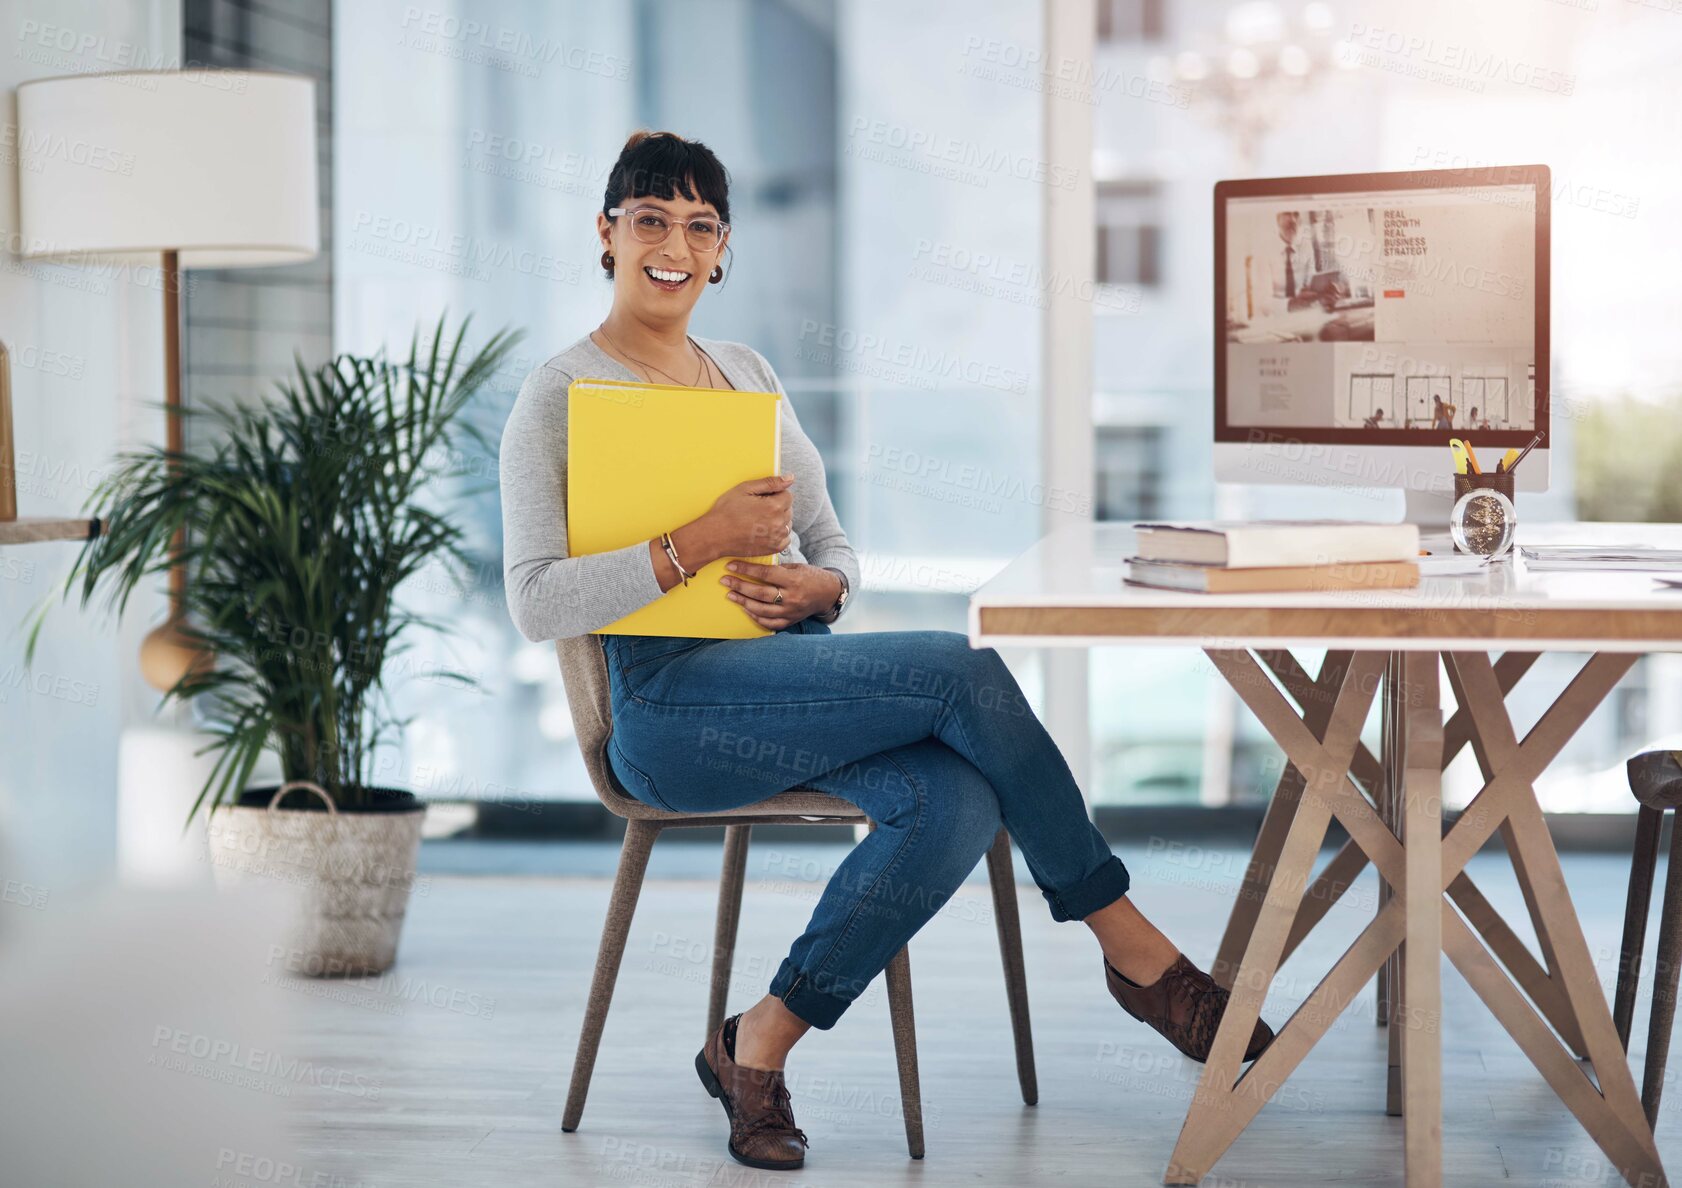 Buy stock photo Full length portrait of an attractive young businesswoman sitting alone and holding files in her office